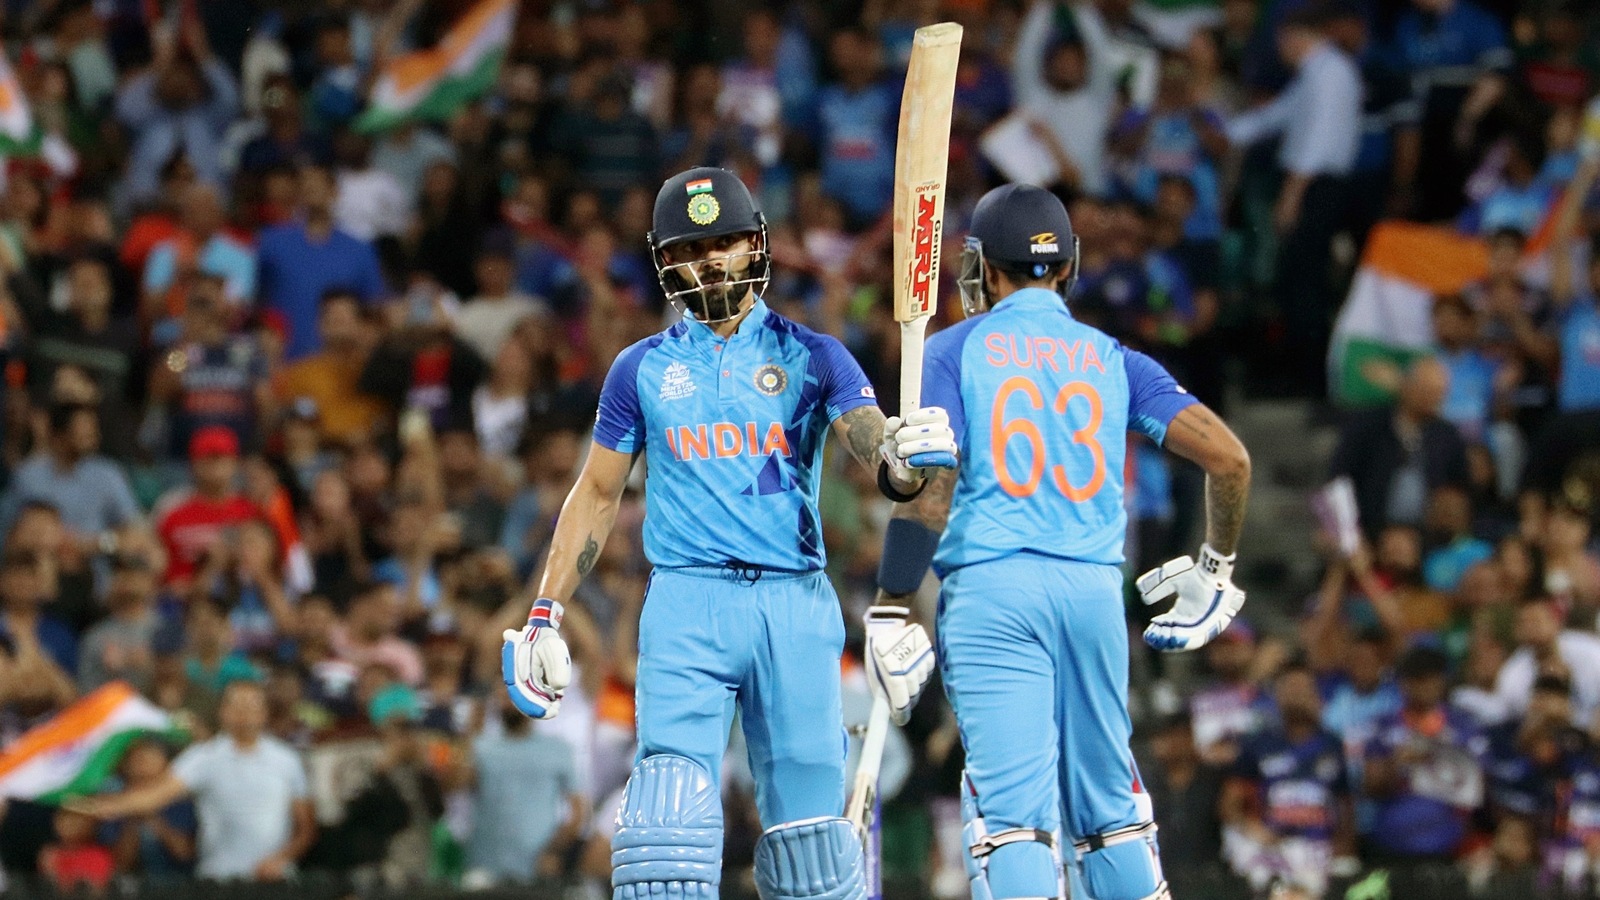 IND vs BAN LIVE Cricket Score Streaming When and Where to watch ODI series online Tech News